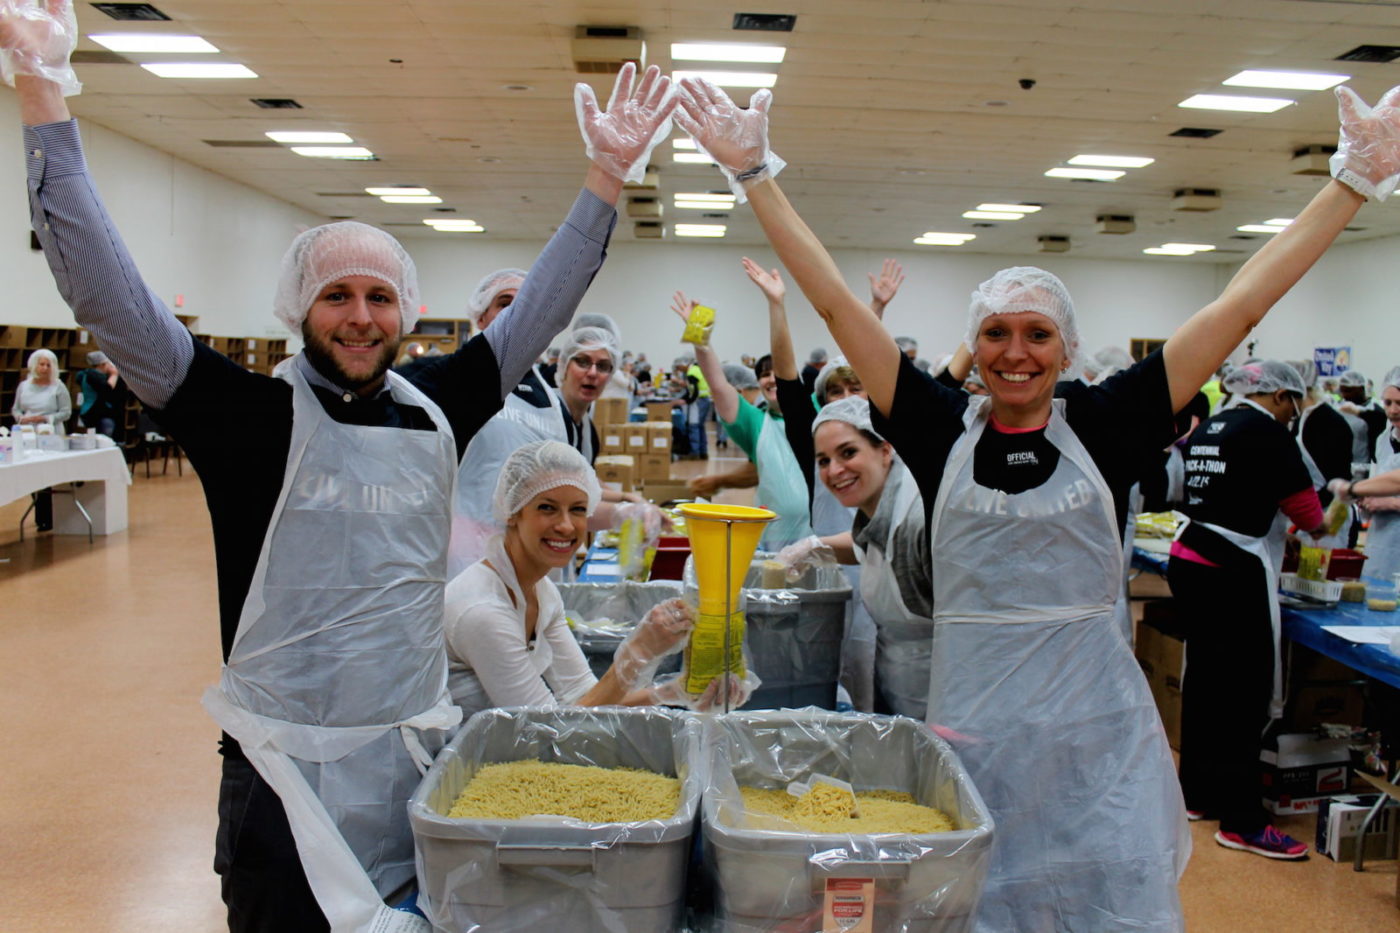 Outreach Program - United Way Meal Packaging Event